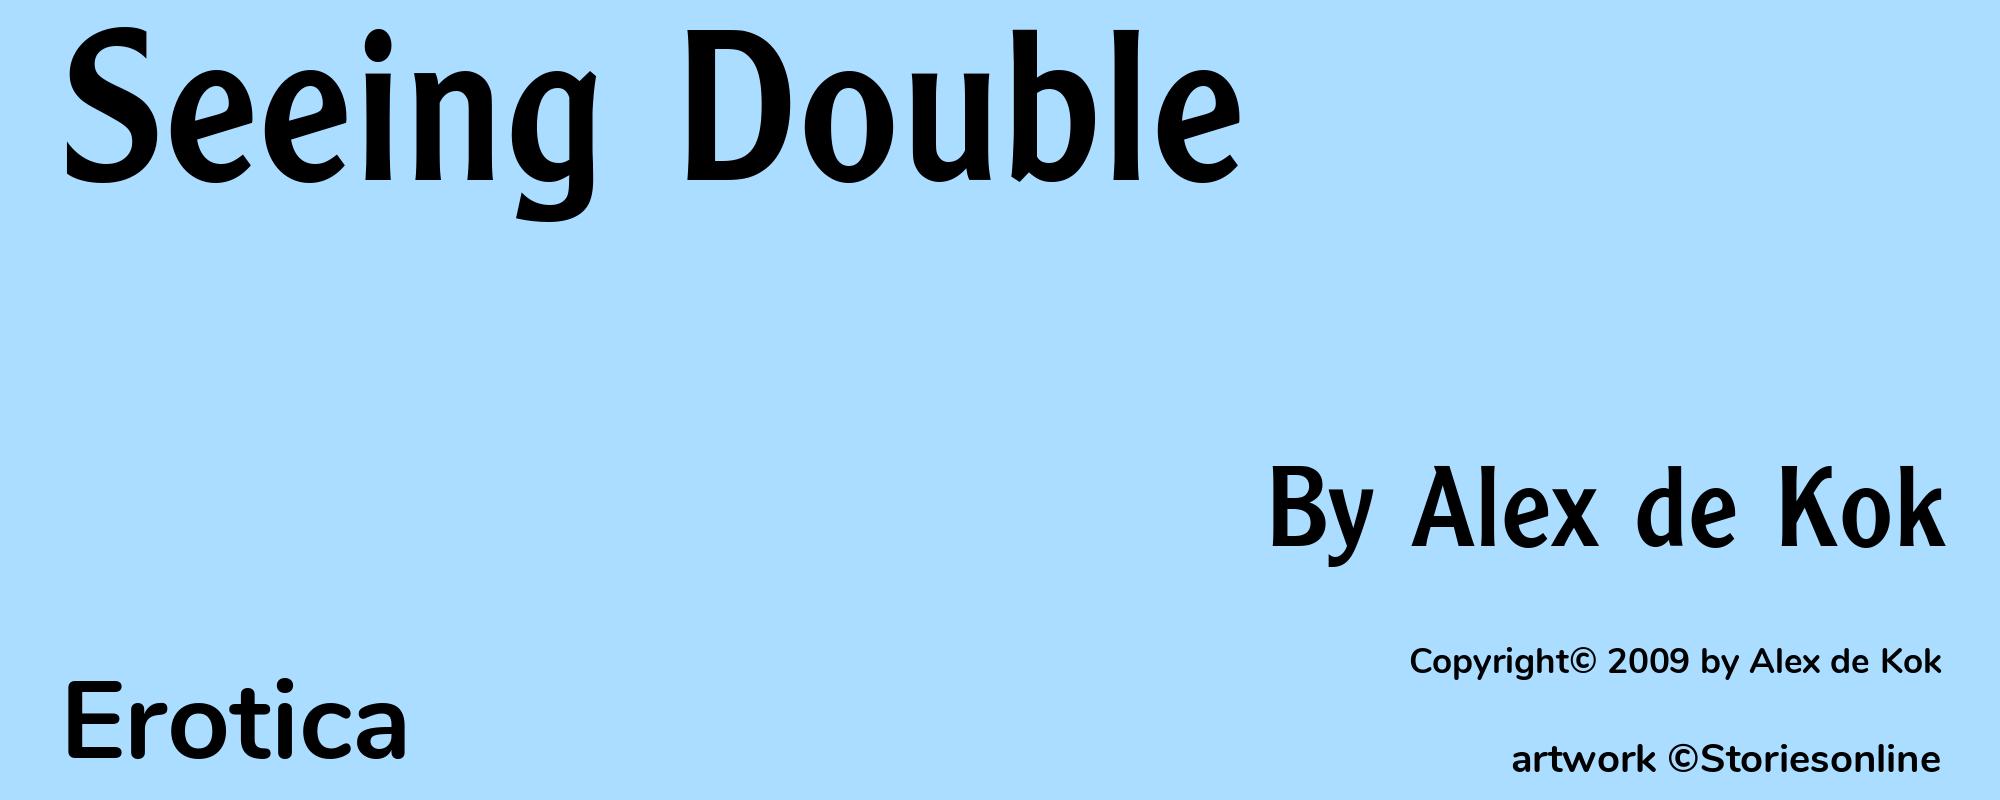 Seeing Double - Cover